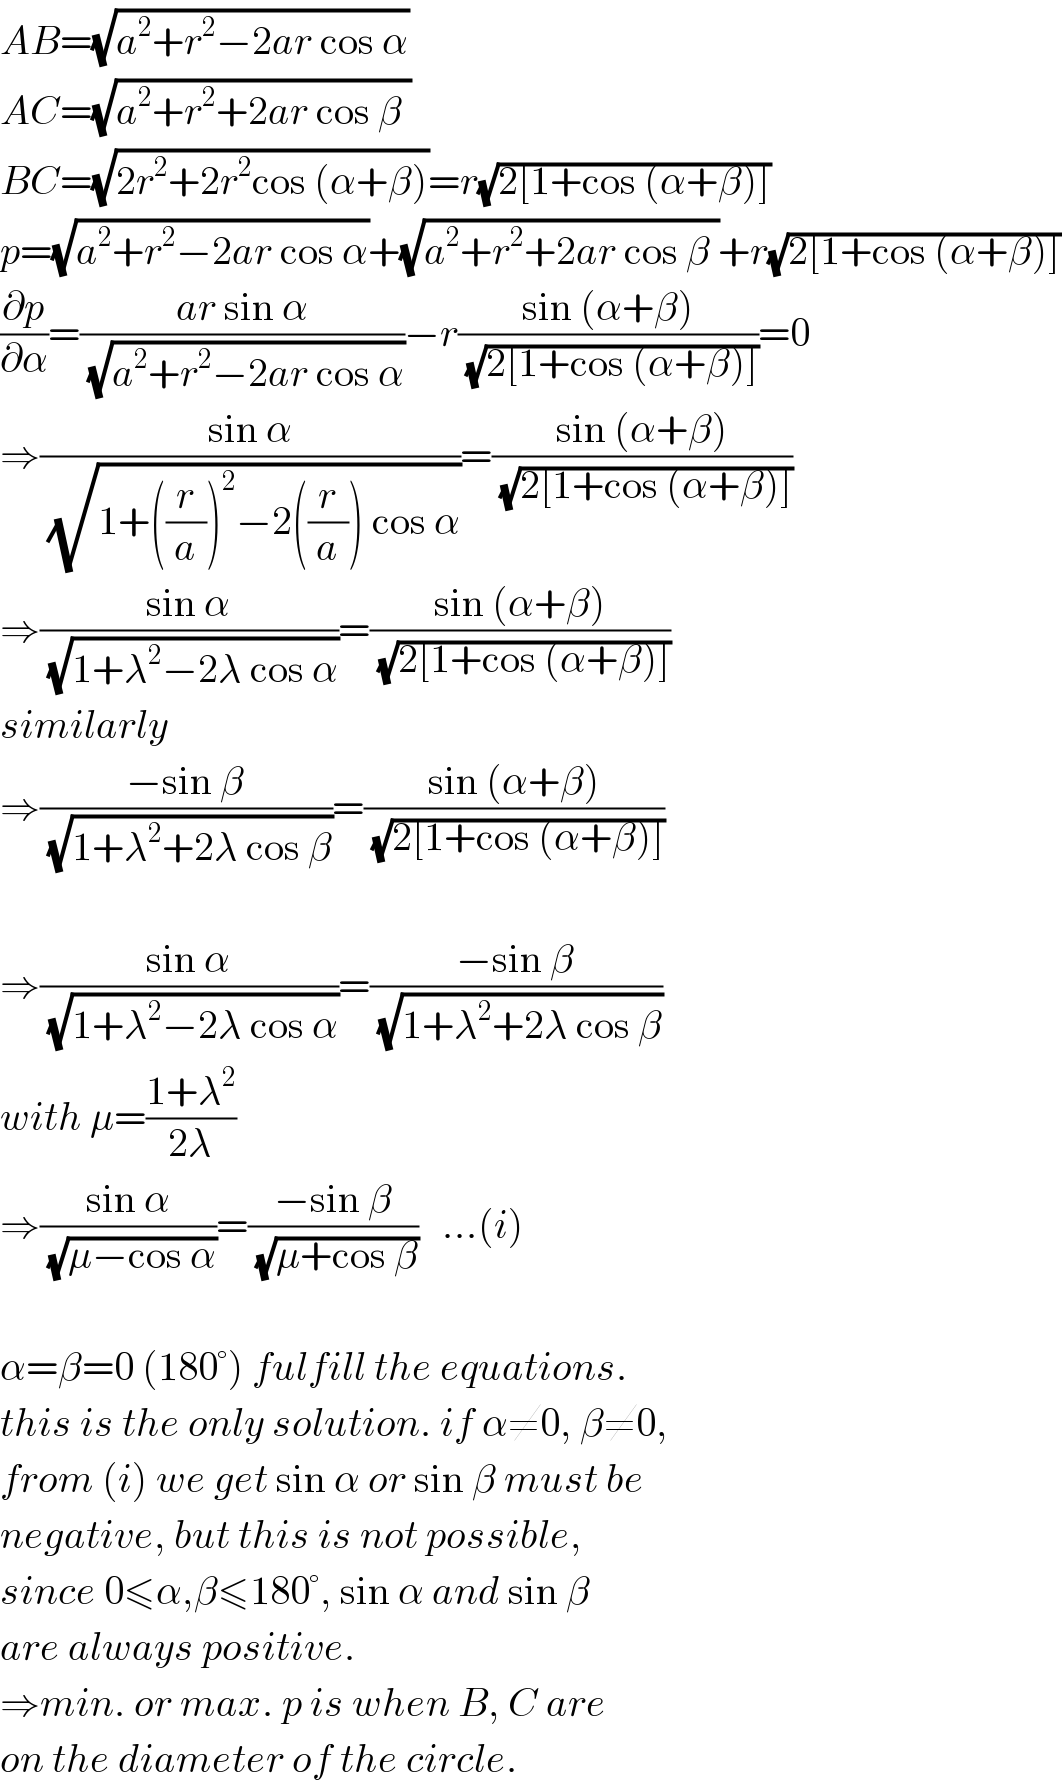 AB=(√(a^2 +r^2 −2ar cos α))  AC=(√(a^2 +r^2 +2ar cos β ))  BC=(√(2r^2 +2r^2 cos (α+β)))=r(√(2[1+cos (α+β)]))  p=(√(a^2 +r^2 −2ar cos α))+(√(a^2 +r^2 +2ar cos β ))+r(√(2[1+cos (α+β)]))  (∂p/∂α)=((ar sin α)/(√(a^2 +r^2 −2ar cos α)))−r((sin (α+β))/(√(2[1+cos (α+β)])))=0  ⇒((sin α)/(√(1+((r/a))^2 −2((r/a)) cos α)))=((sin (α+β))/(√(2[1+cos (α+β)])))  ⇒((sin α)/(√(1+λ^2 −2λ cos α)))=((sin (α+β))/(√(2[1+cos (α+β)])))  similarly  ⇒((−sin β)/(√(1+λ^2 +2λ cos β)))=((sin (α+β))/(√(2[1+cos (α+β)])))    ⇒((sin α)/(√(1+λ^2 −2λ cos α)))=((−sin β)/(√(1+λ^2 +2λ cos β)))  with μ=((1+λ^2 )/(2λ))  ⇒((sin α)/(√(μ−cos α)))=((−sin β)/(√(μ+cos β)))   ...(i)    α=β=0 (180°) fulfill the equations.   this is the only solution. if α≠0, β≠0,  from (i) we get sin α or sin β must be  negative, but this is not possible,  since 0≤α,β≤180°, sin α and sin β  are always positive.  ⇒min. or max. p is when B, C are  on the diameter of the circle.  